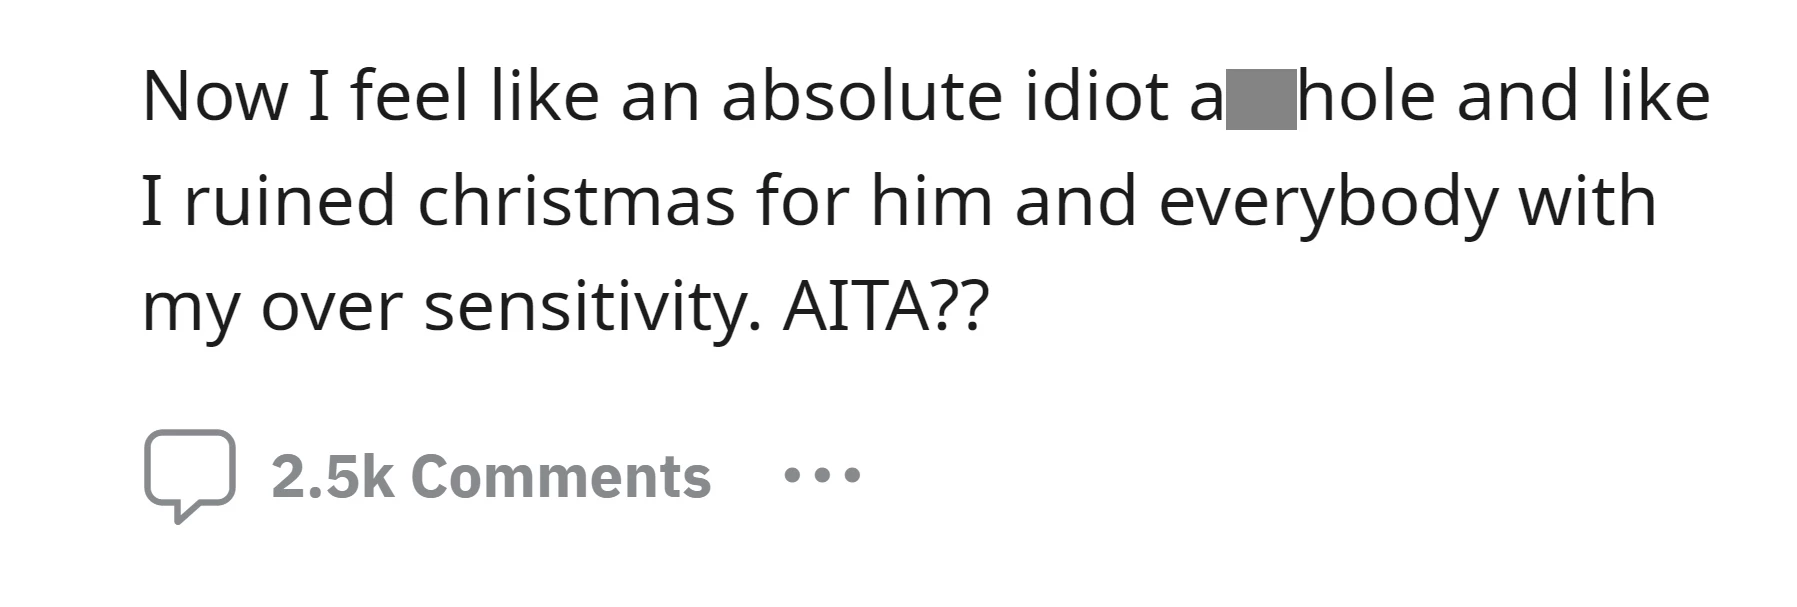 The OP feels like she acted insensitively and ruined Christmas for her husband and everyone